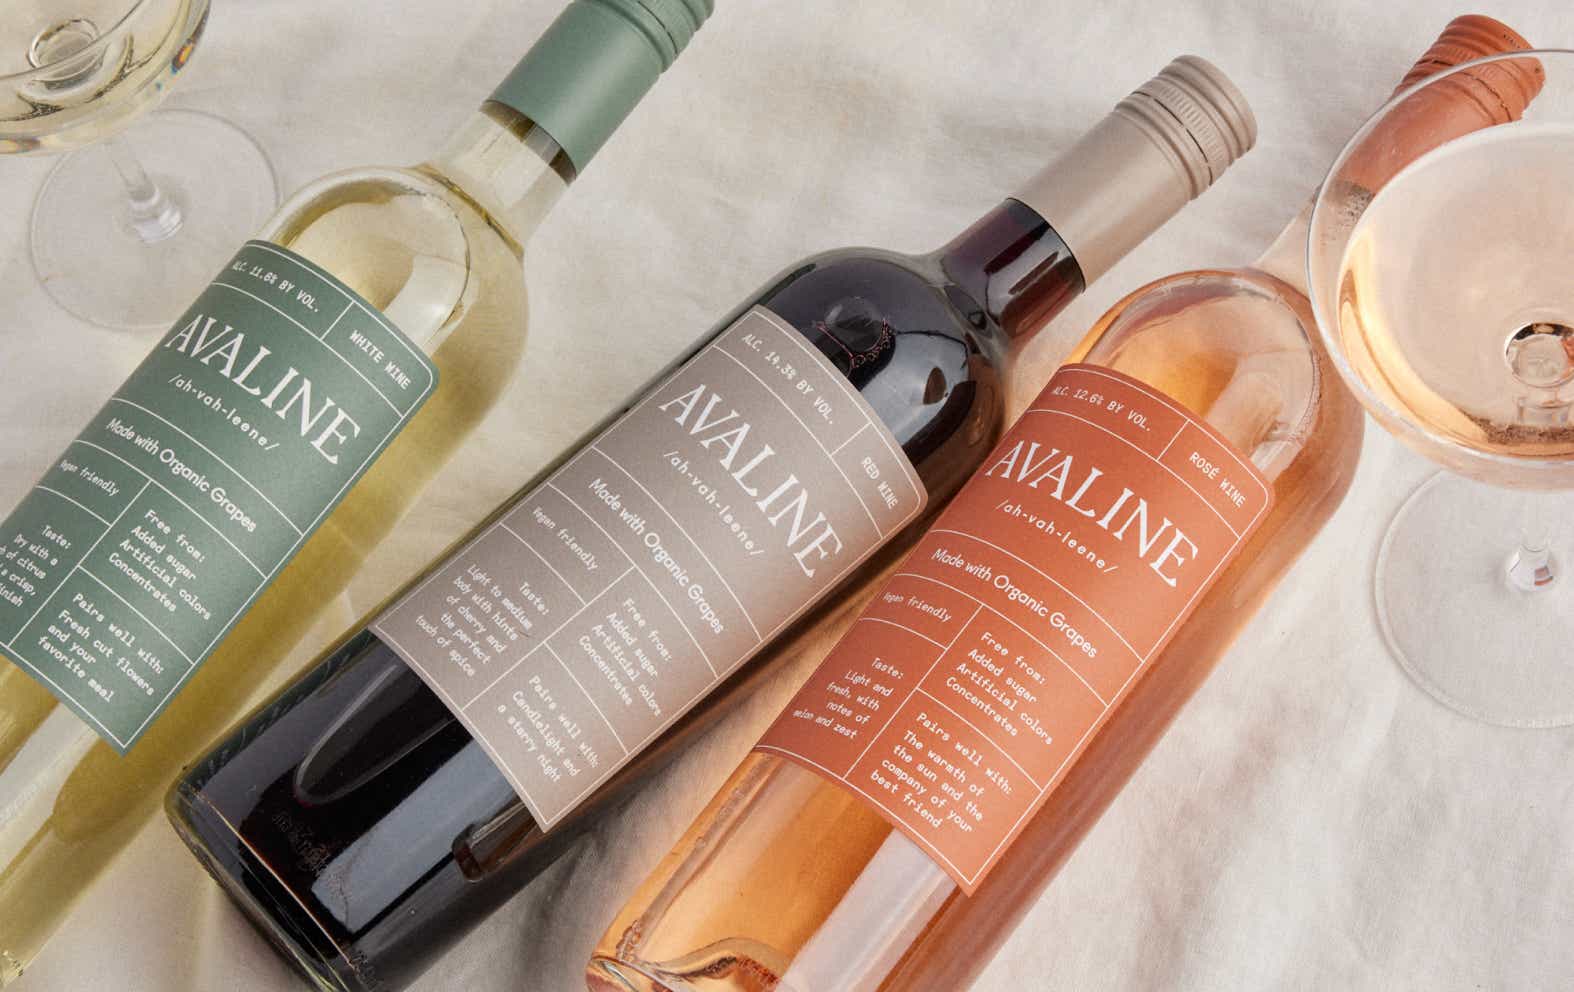 3 bottles of Avaline wine lying on a table